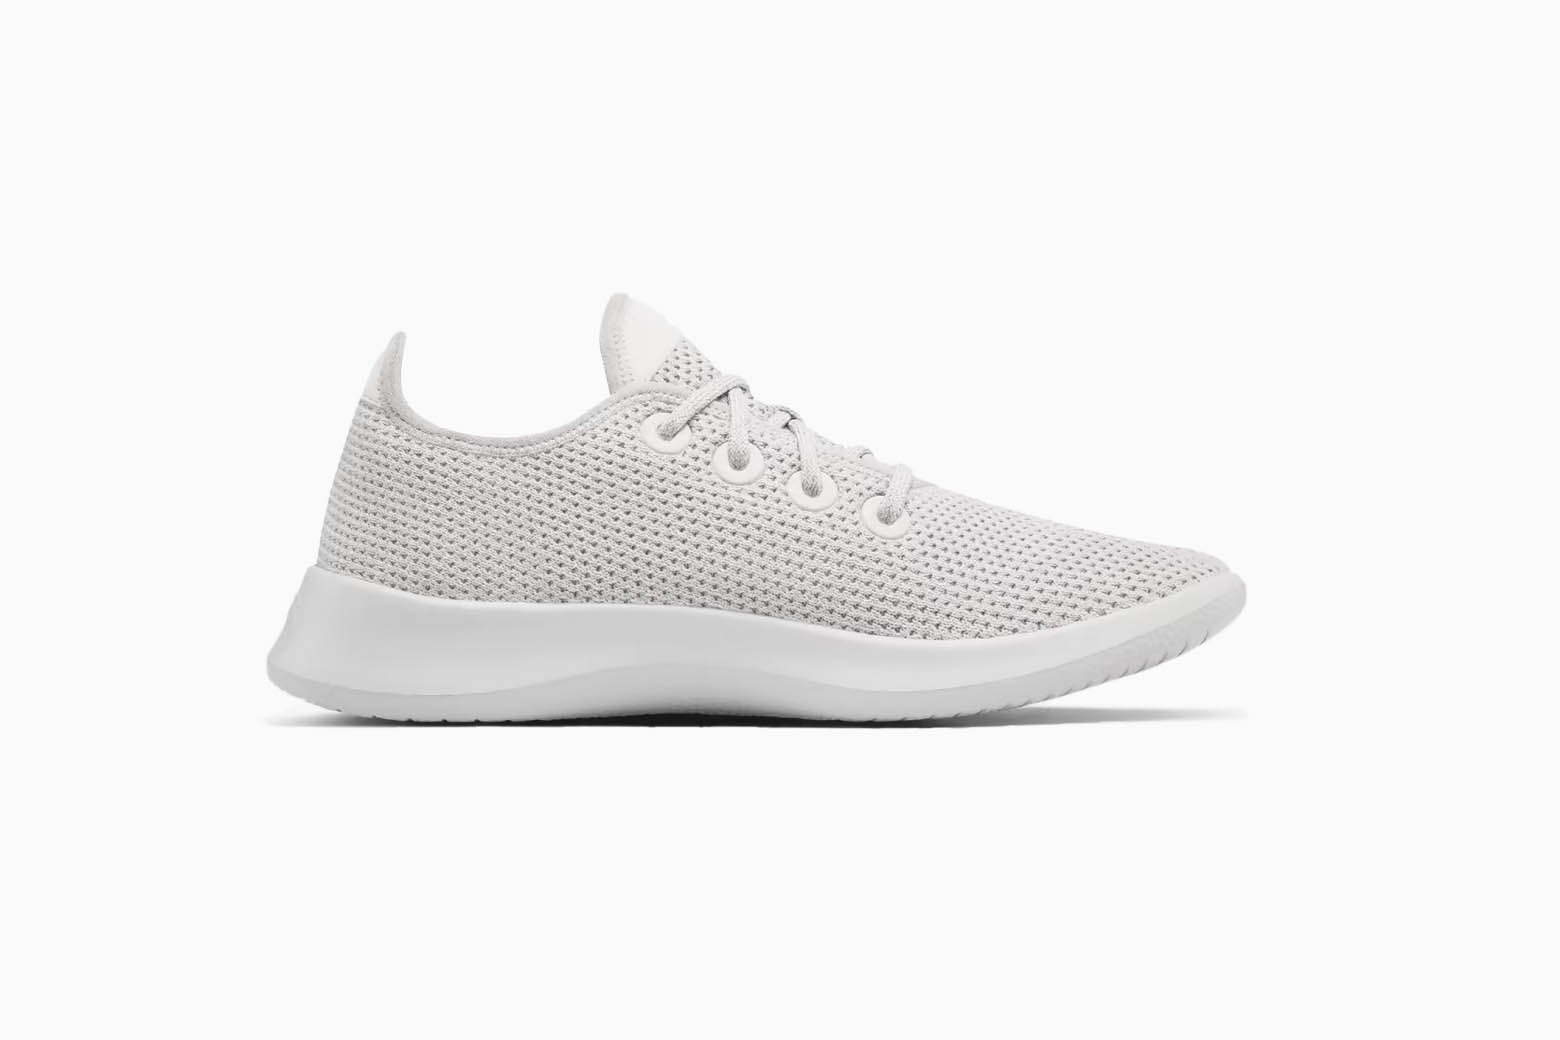 The Best White Sneakers Stylish Women Need (Style Guide)